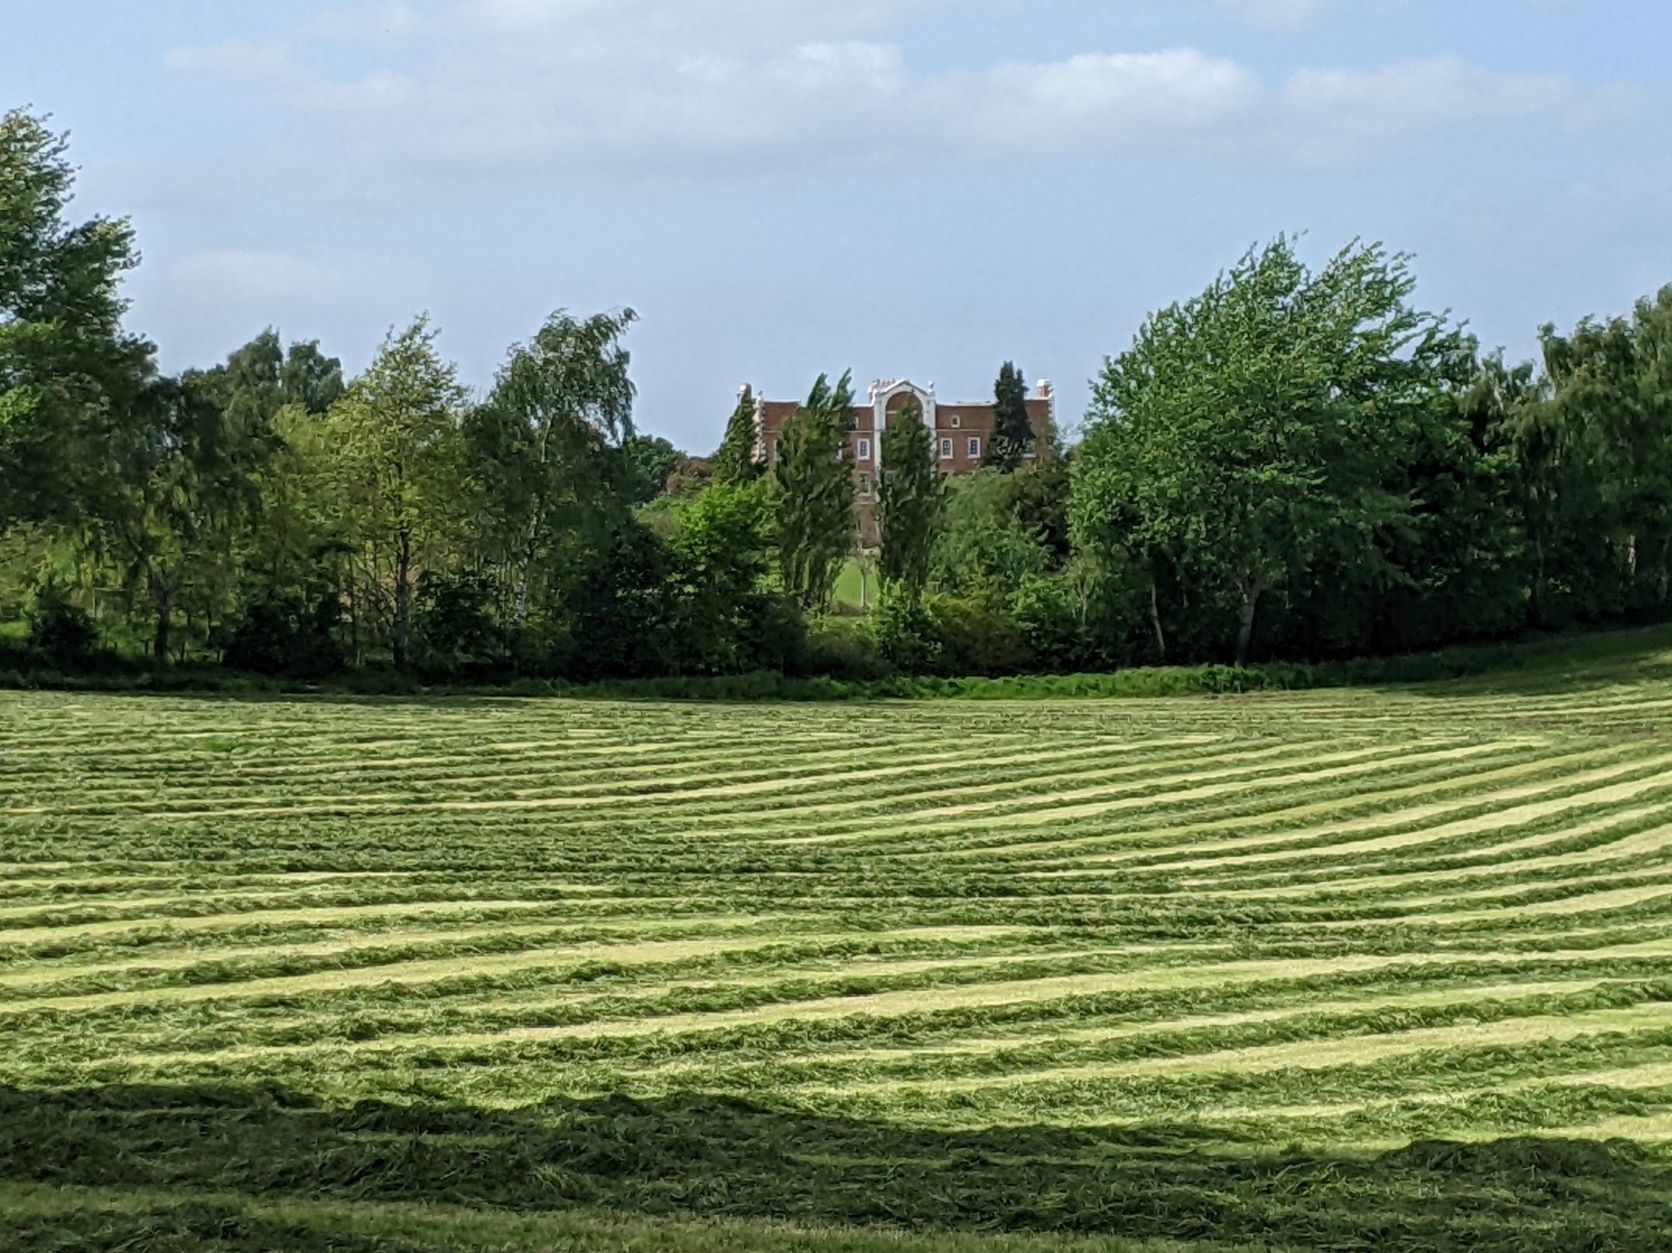 Hankelow Hall from the South Cheshire Way, May 2022